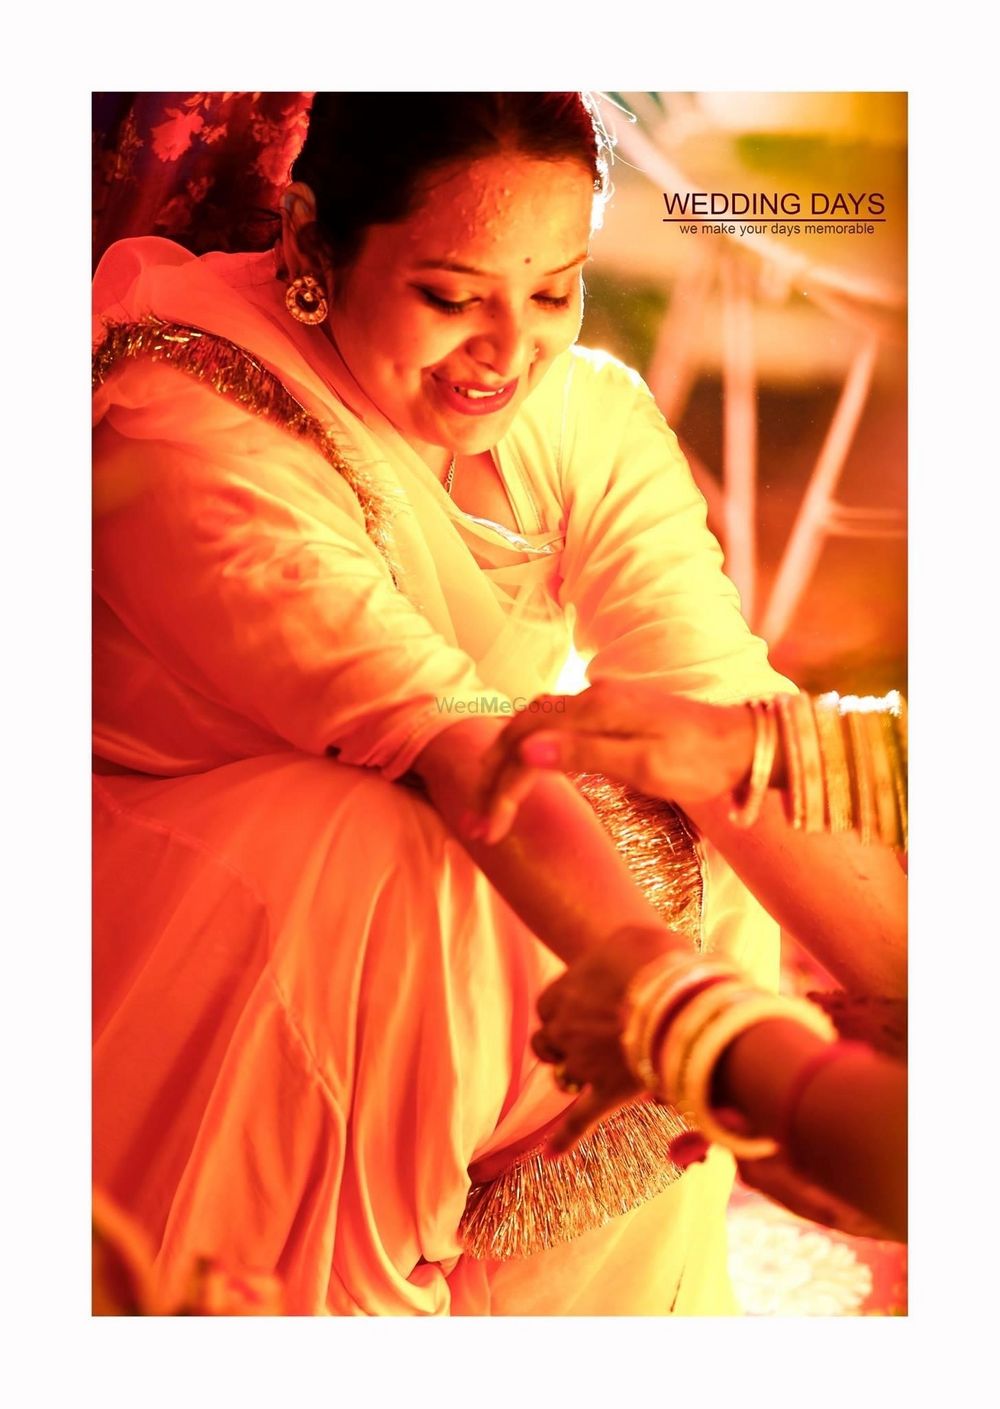 Photo From wedding days of Poorva  - By Wedding Days